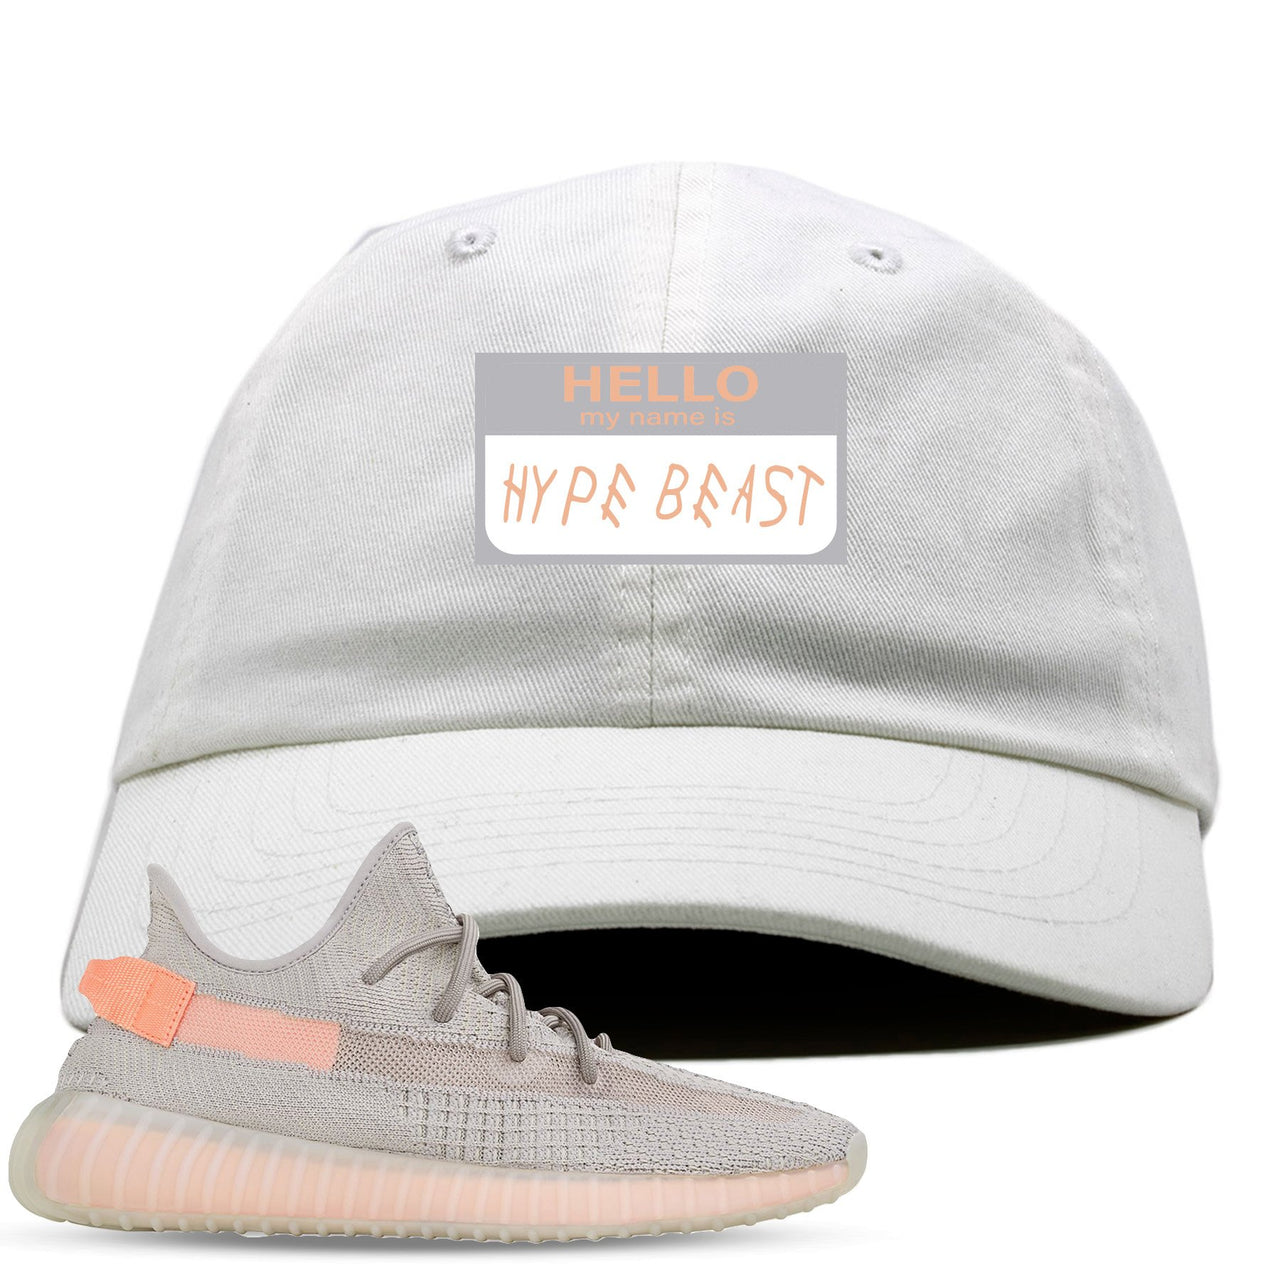 True Form v2 350s Dad Hat | Hello My Name Is Hype Beast Woe, White